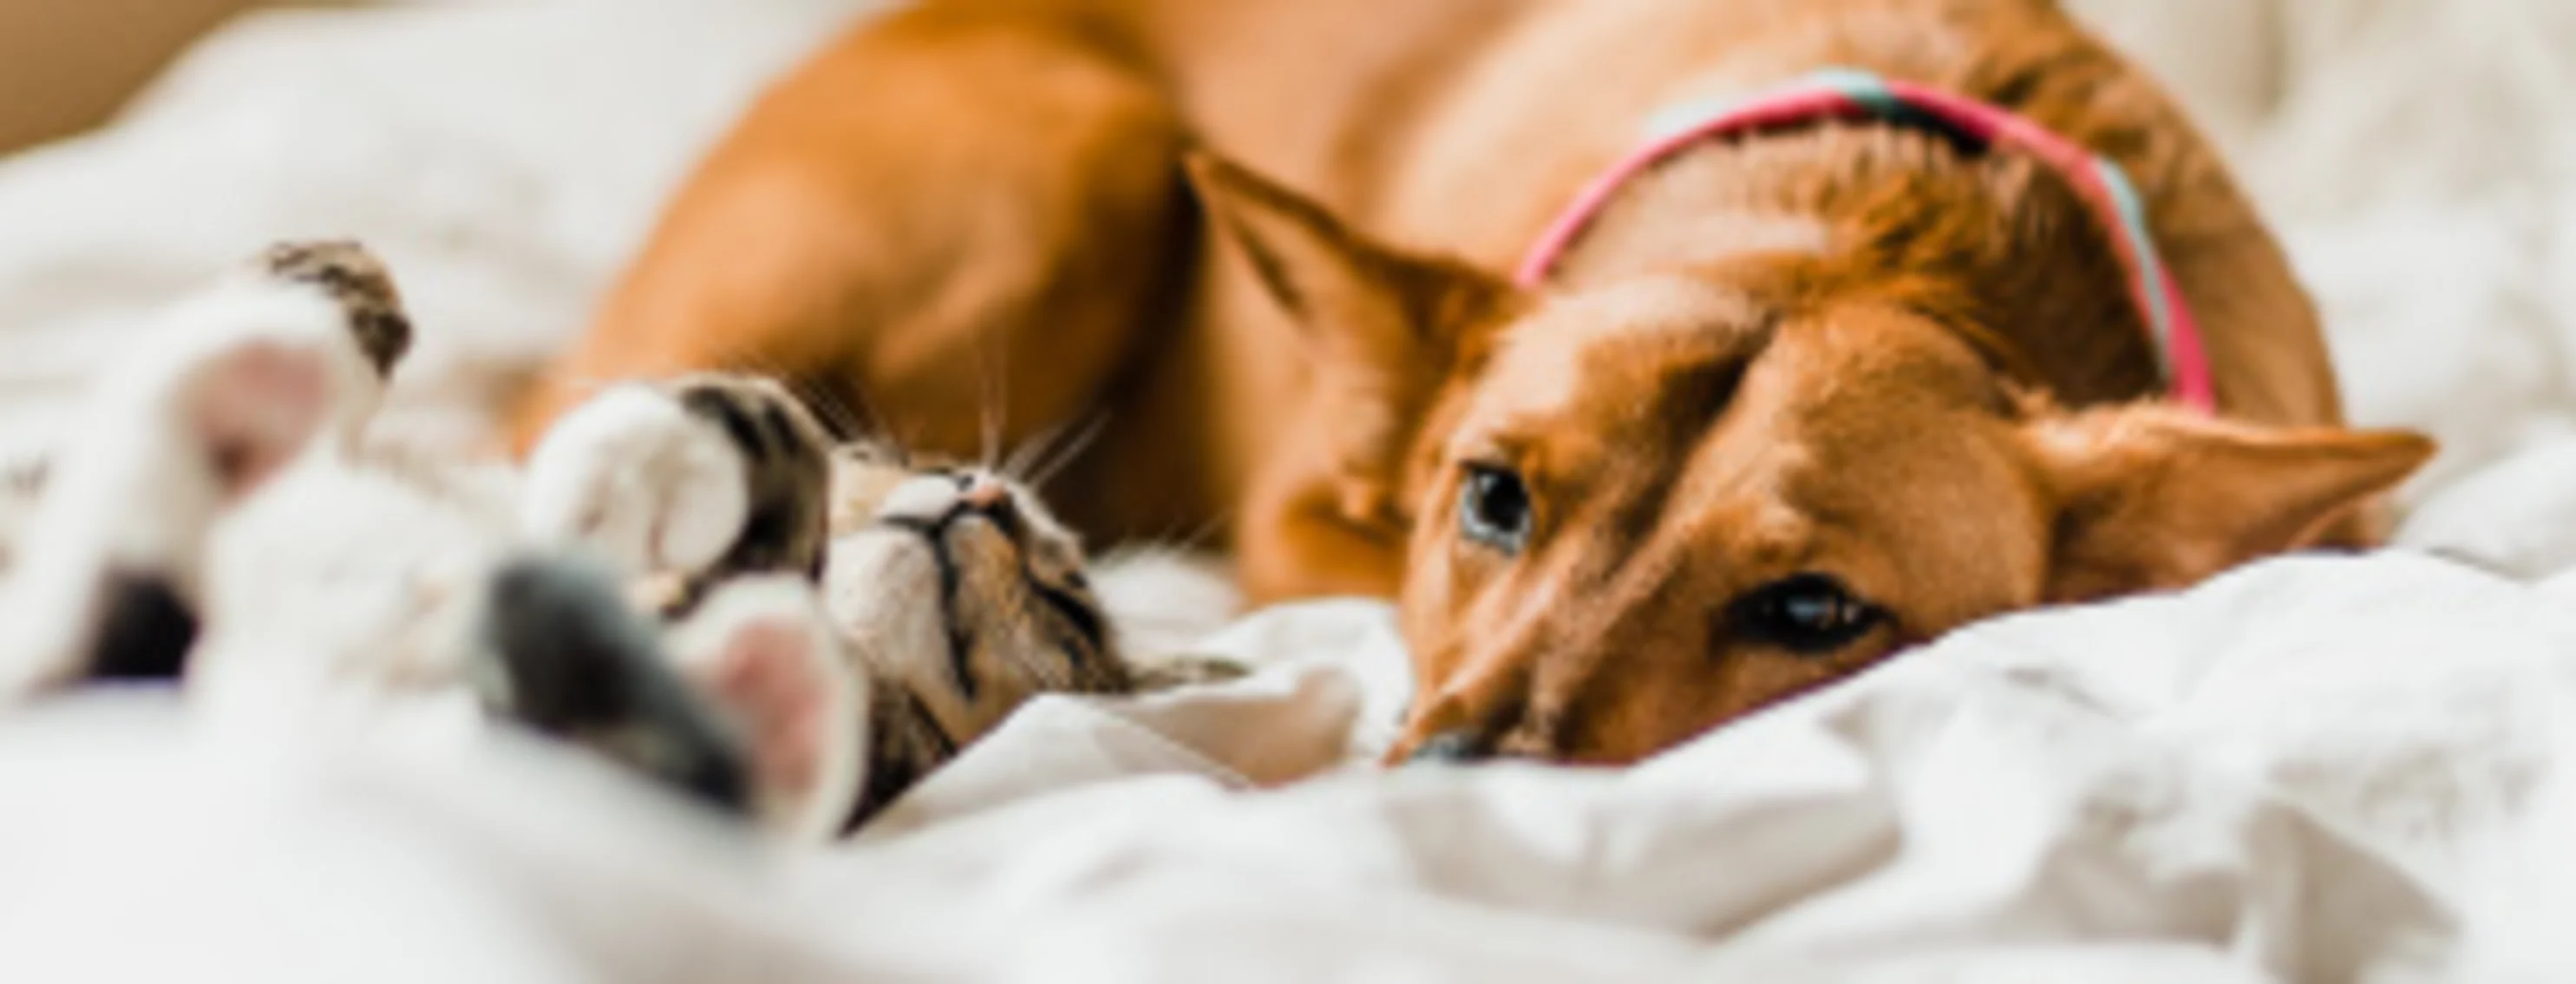 A dog and cat next to each other on a bed